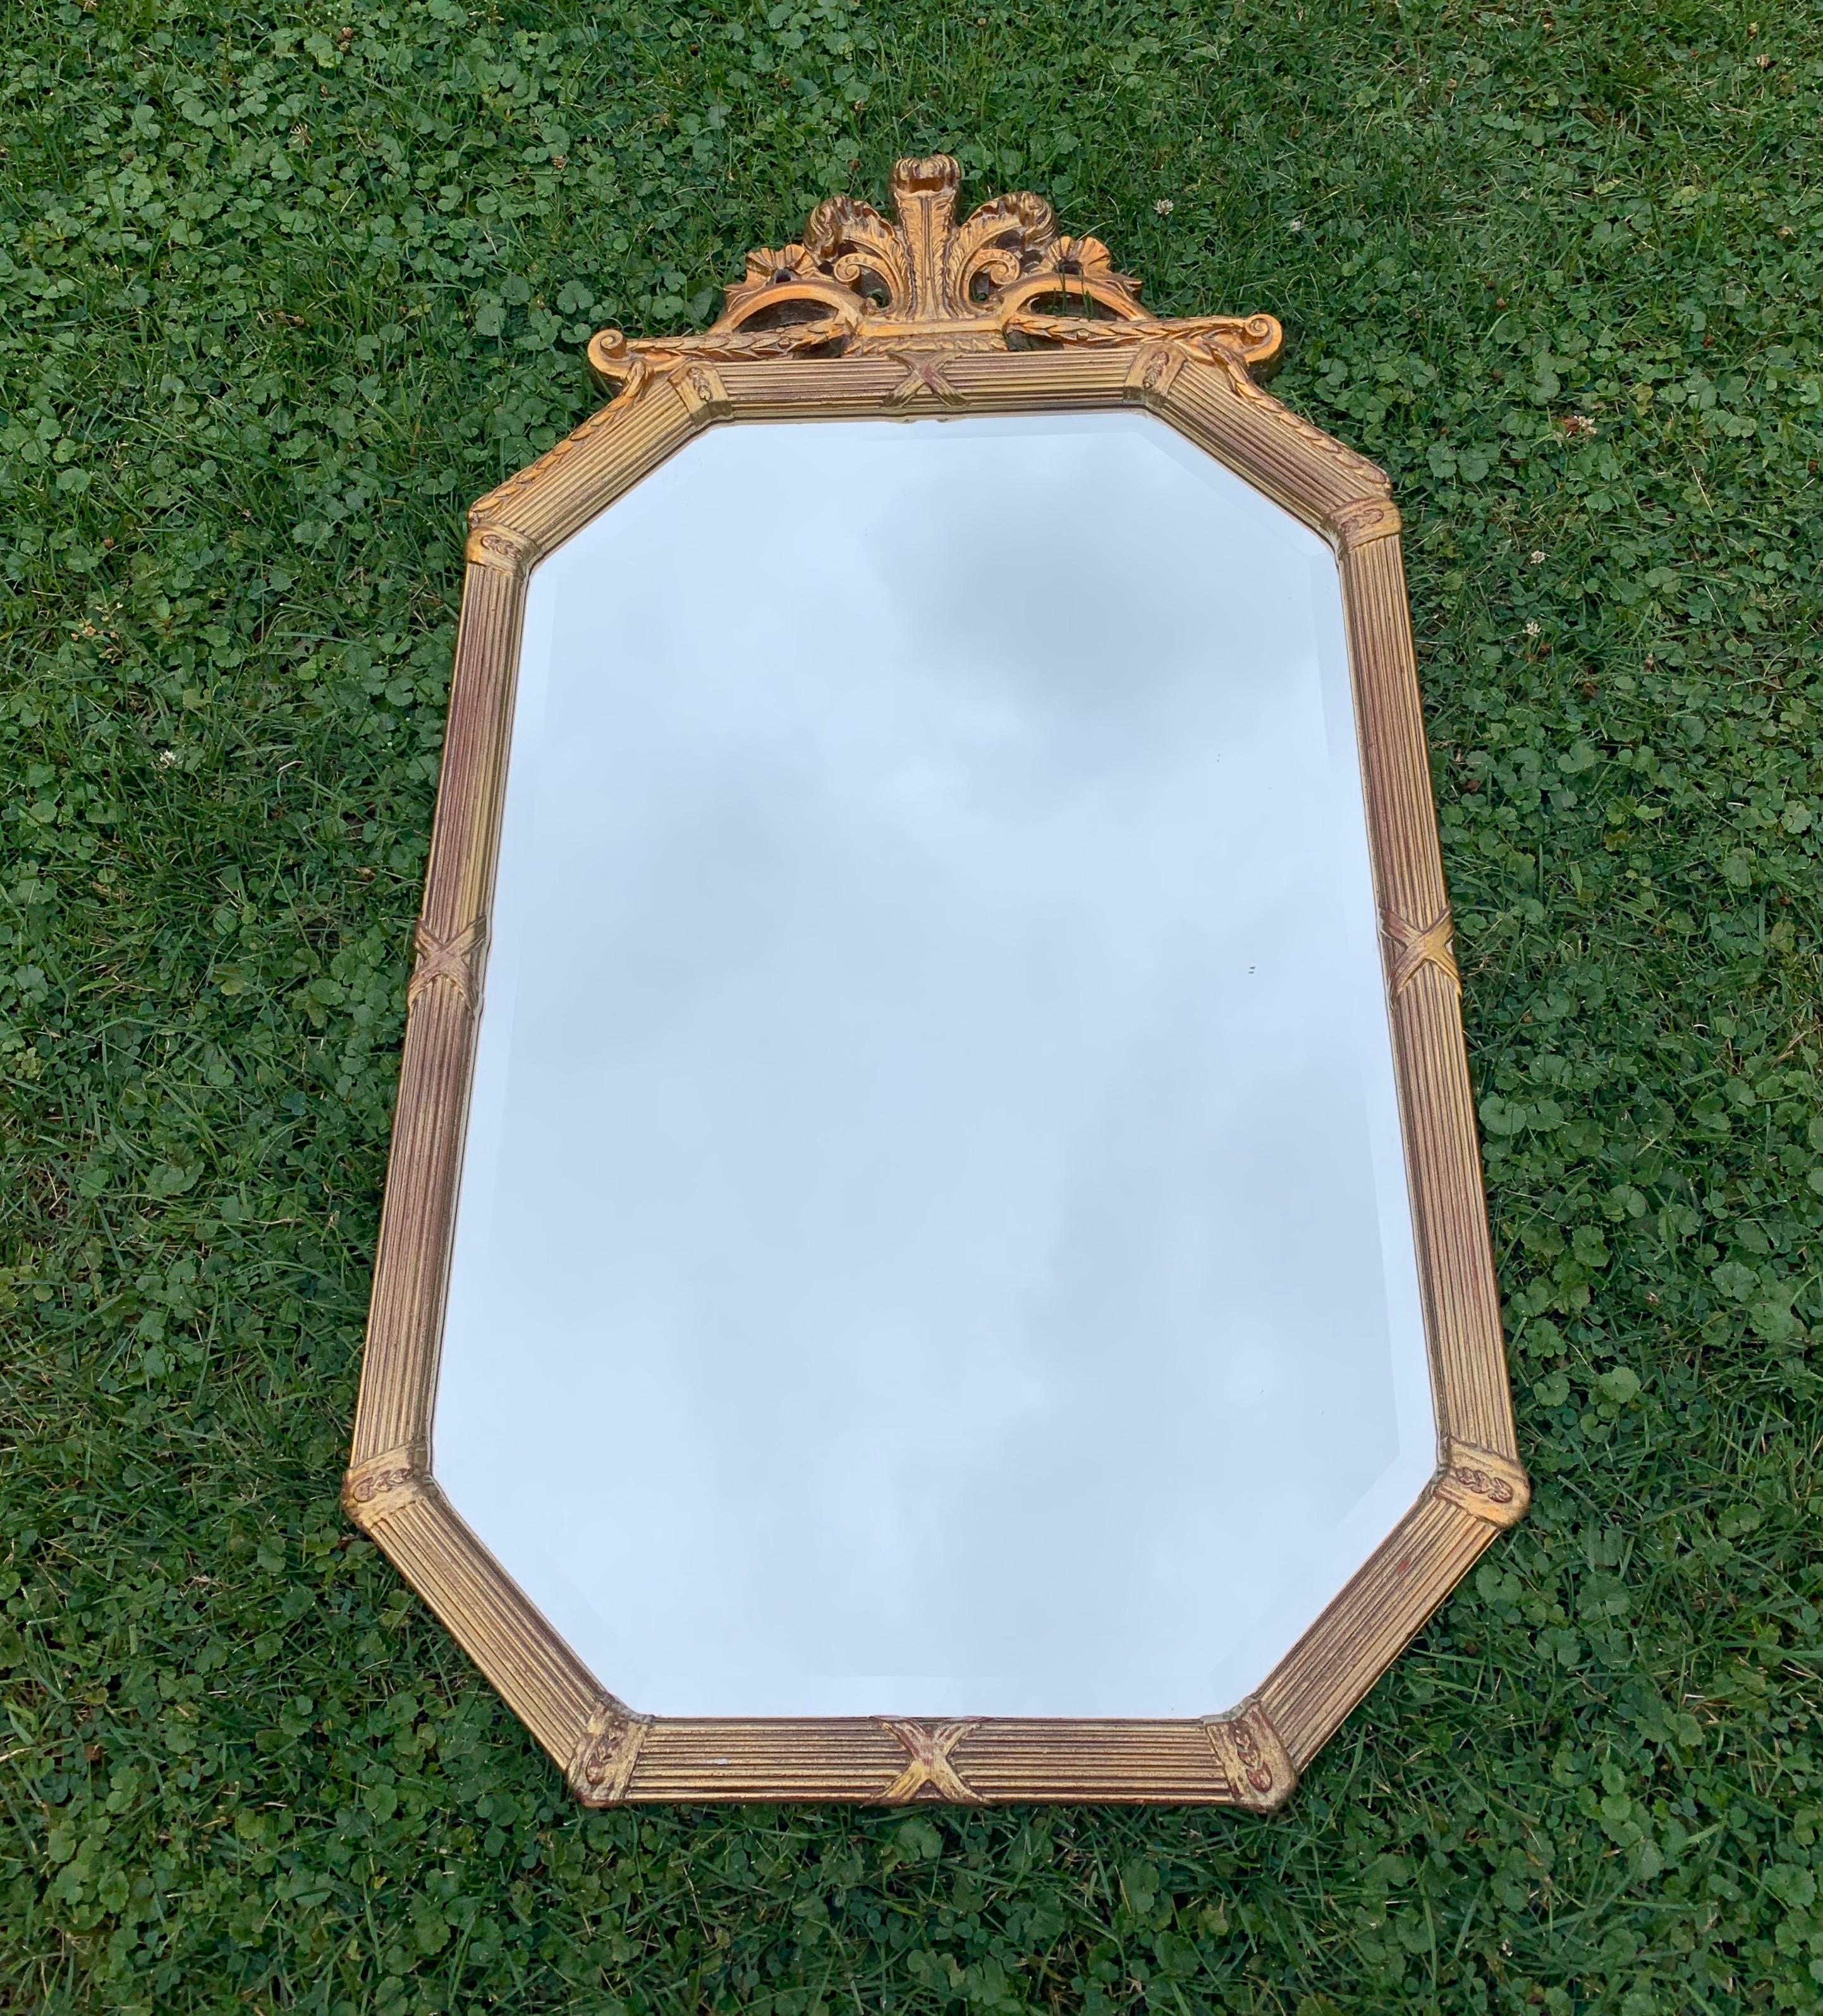 Trumeau wall mirror with gilded carved wood frame by the Uttermost Company. Virginia, USA, circa 1980.

All wood frame. Signed with inked stamp to back. Includes attached hooks.